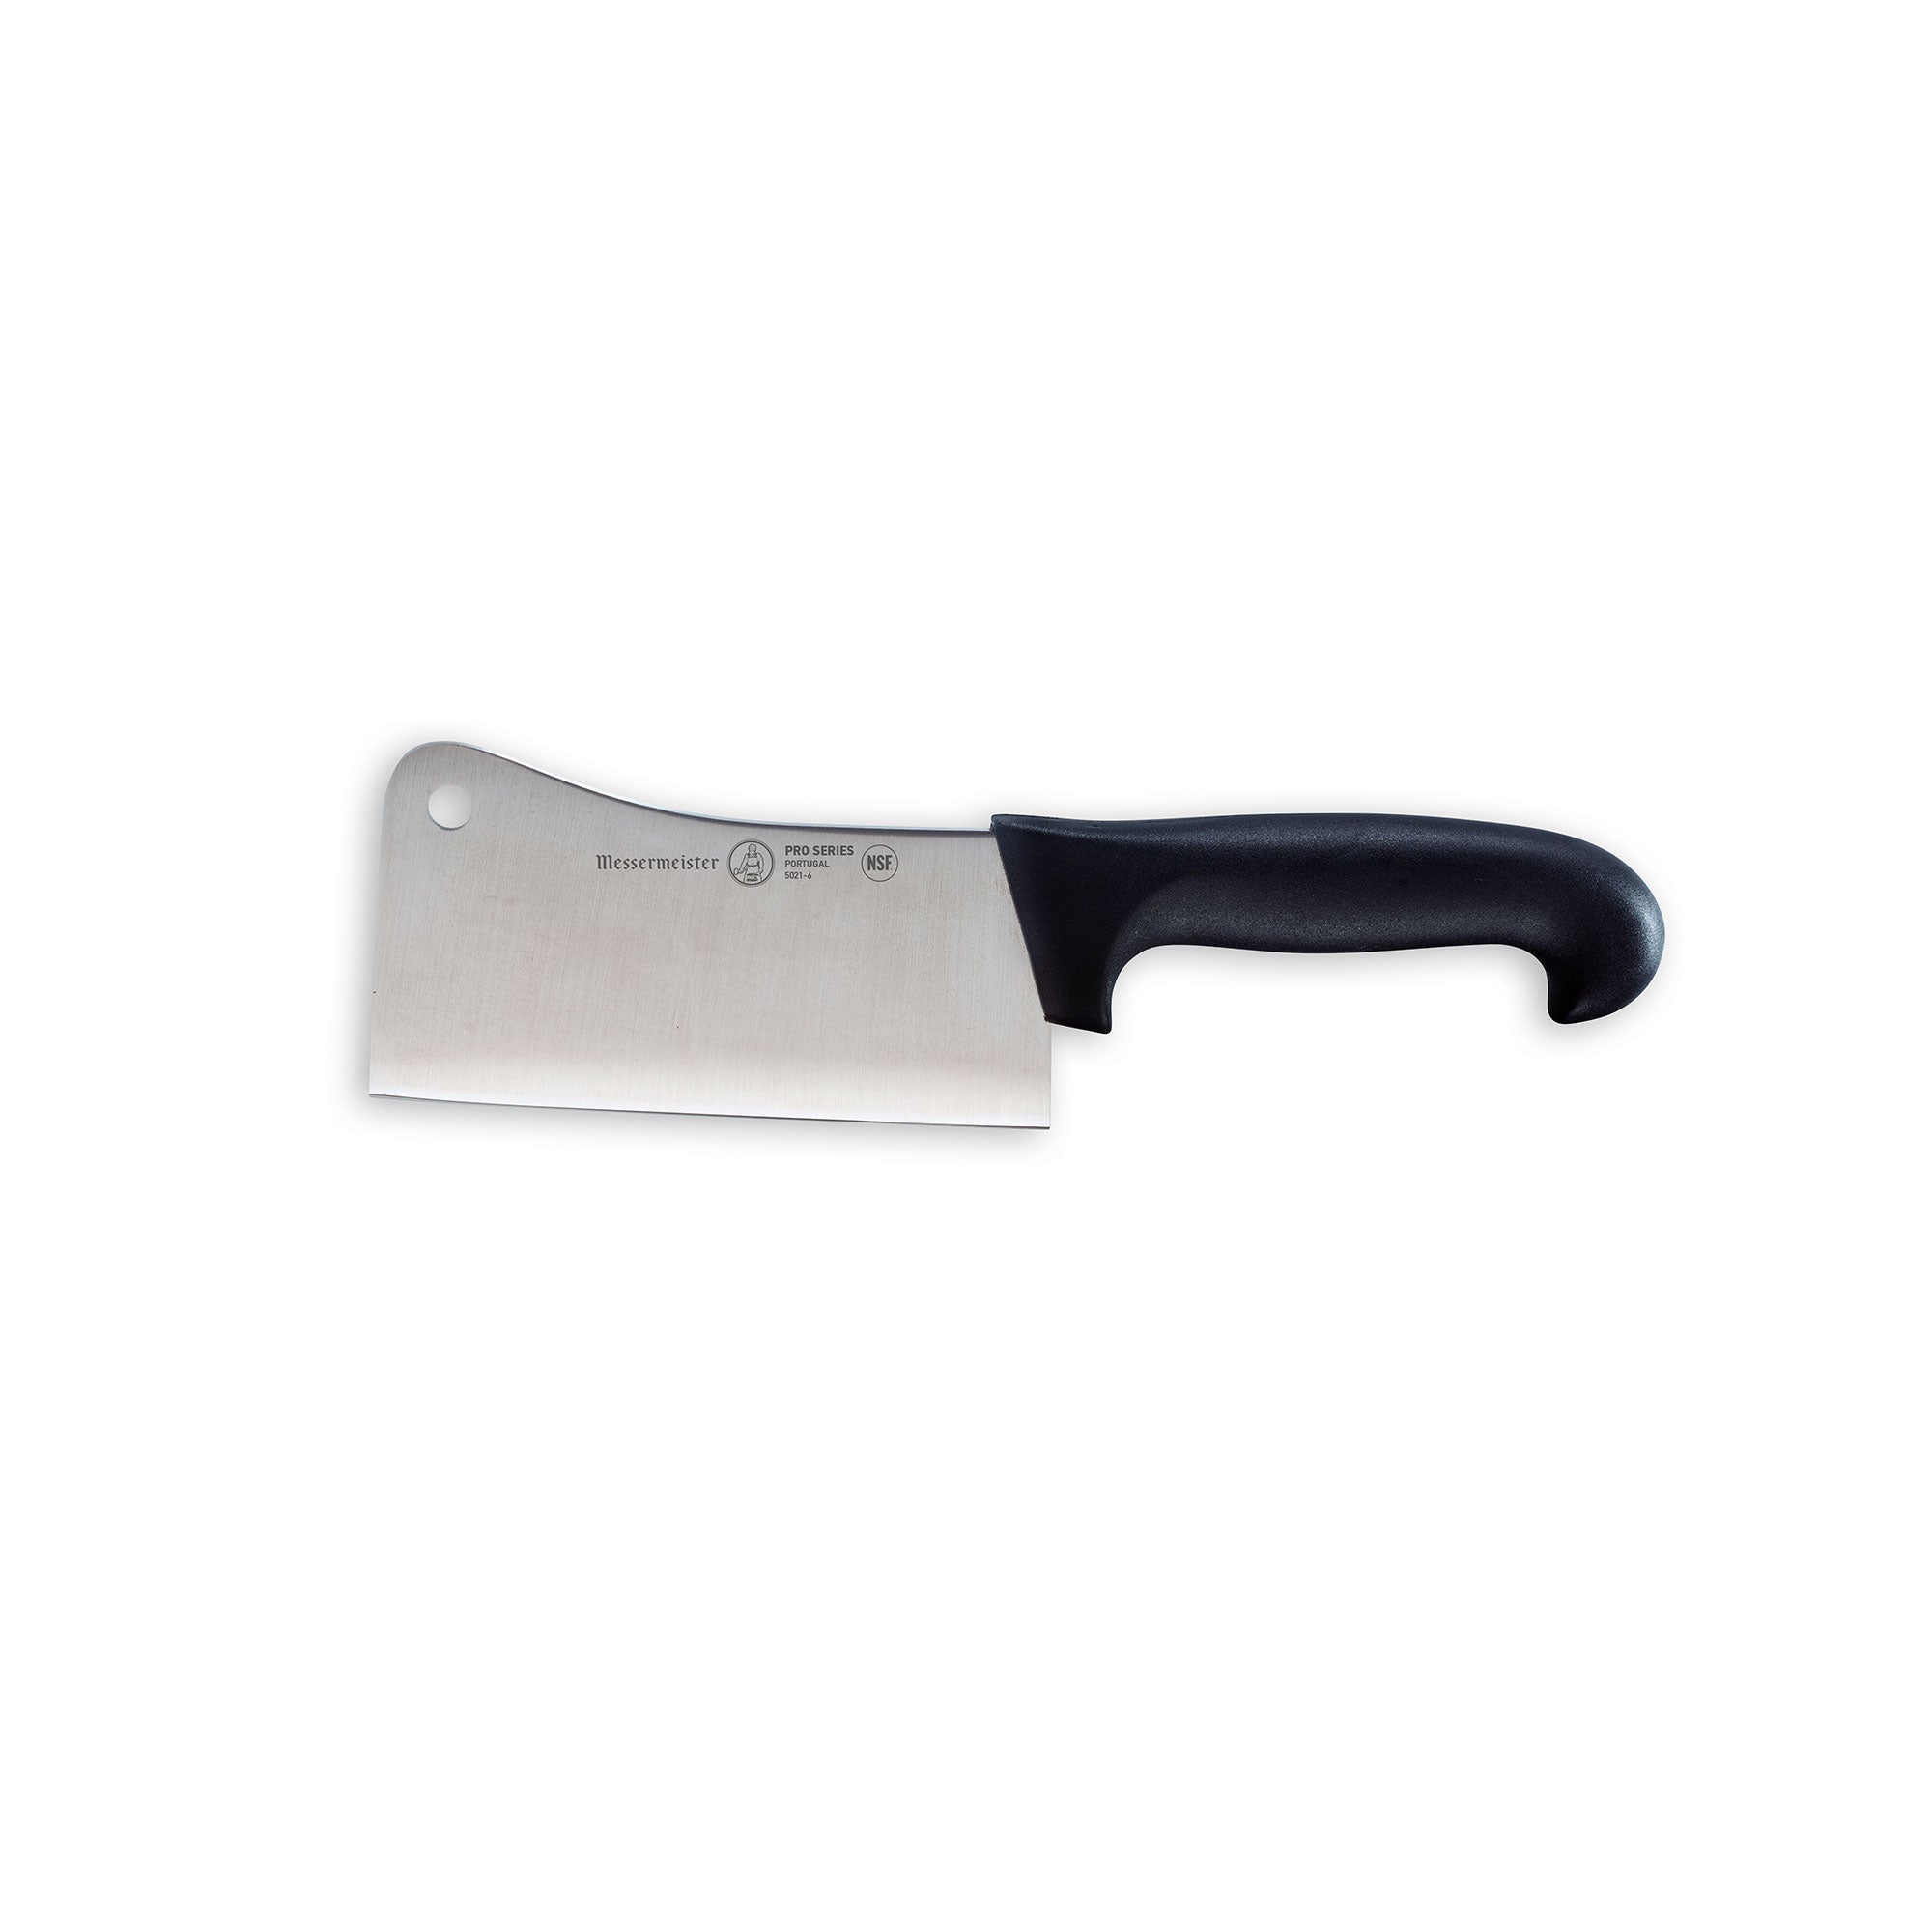 2 x 6-inch Meat Cleaver Knife Stainless Steel Professional Butcher